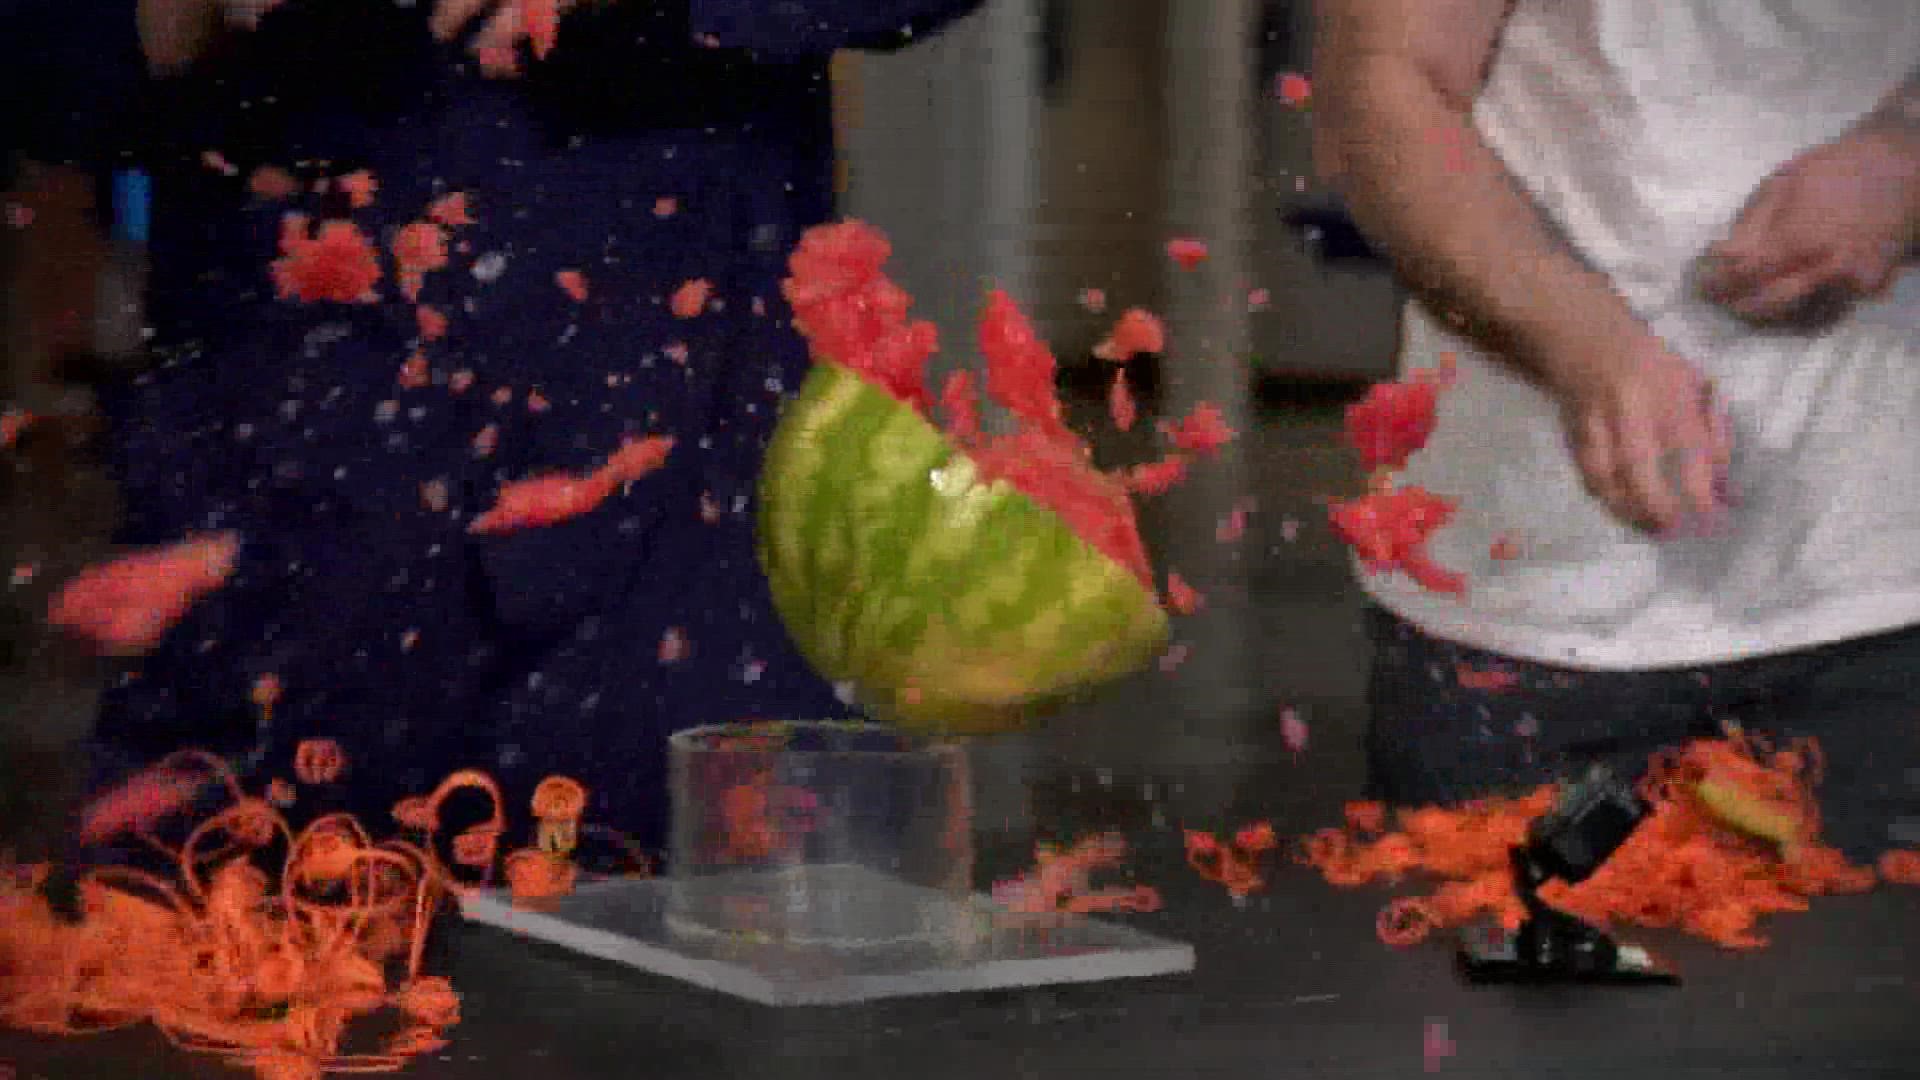 9NEWS Science guy Steve Spangler shares a fun science experiment that only requires a watermelon and some rubber bands.